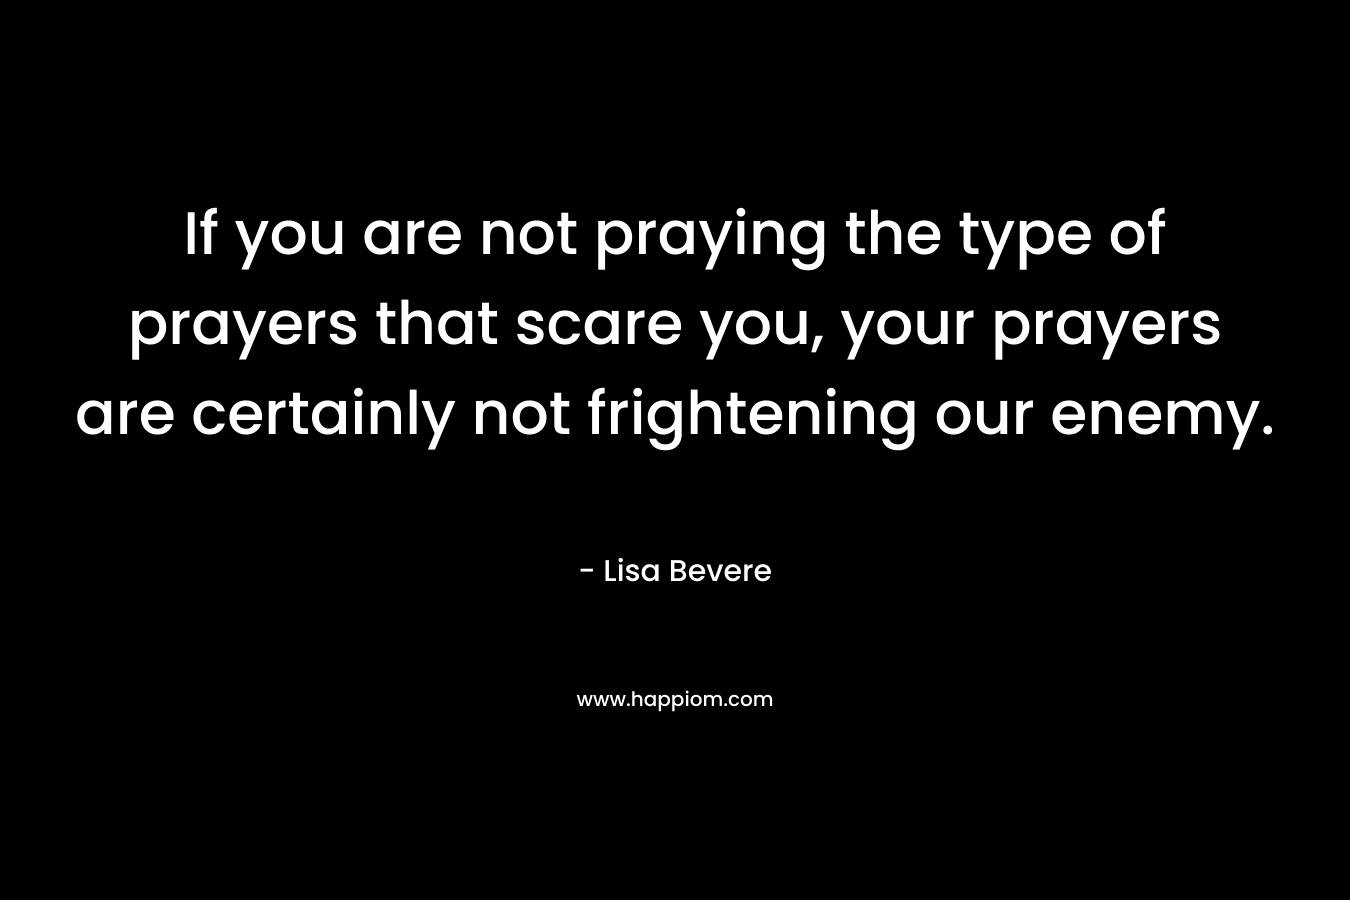 If you are not praying the type of prayers that scare you, your prayers are certainly not frightening our enemy.